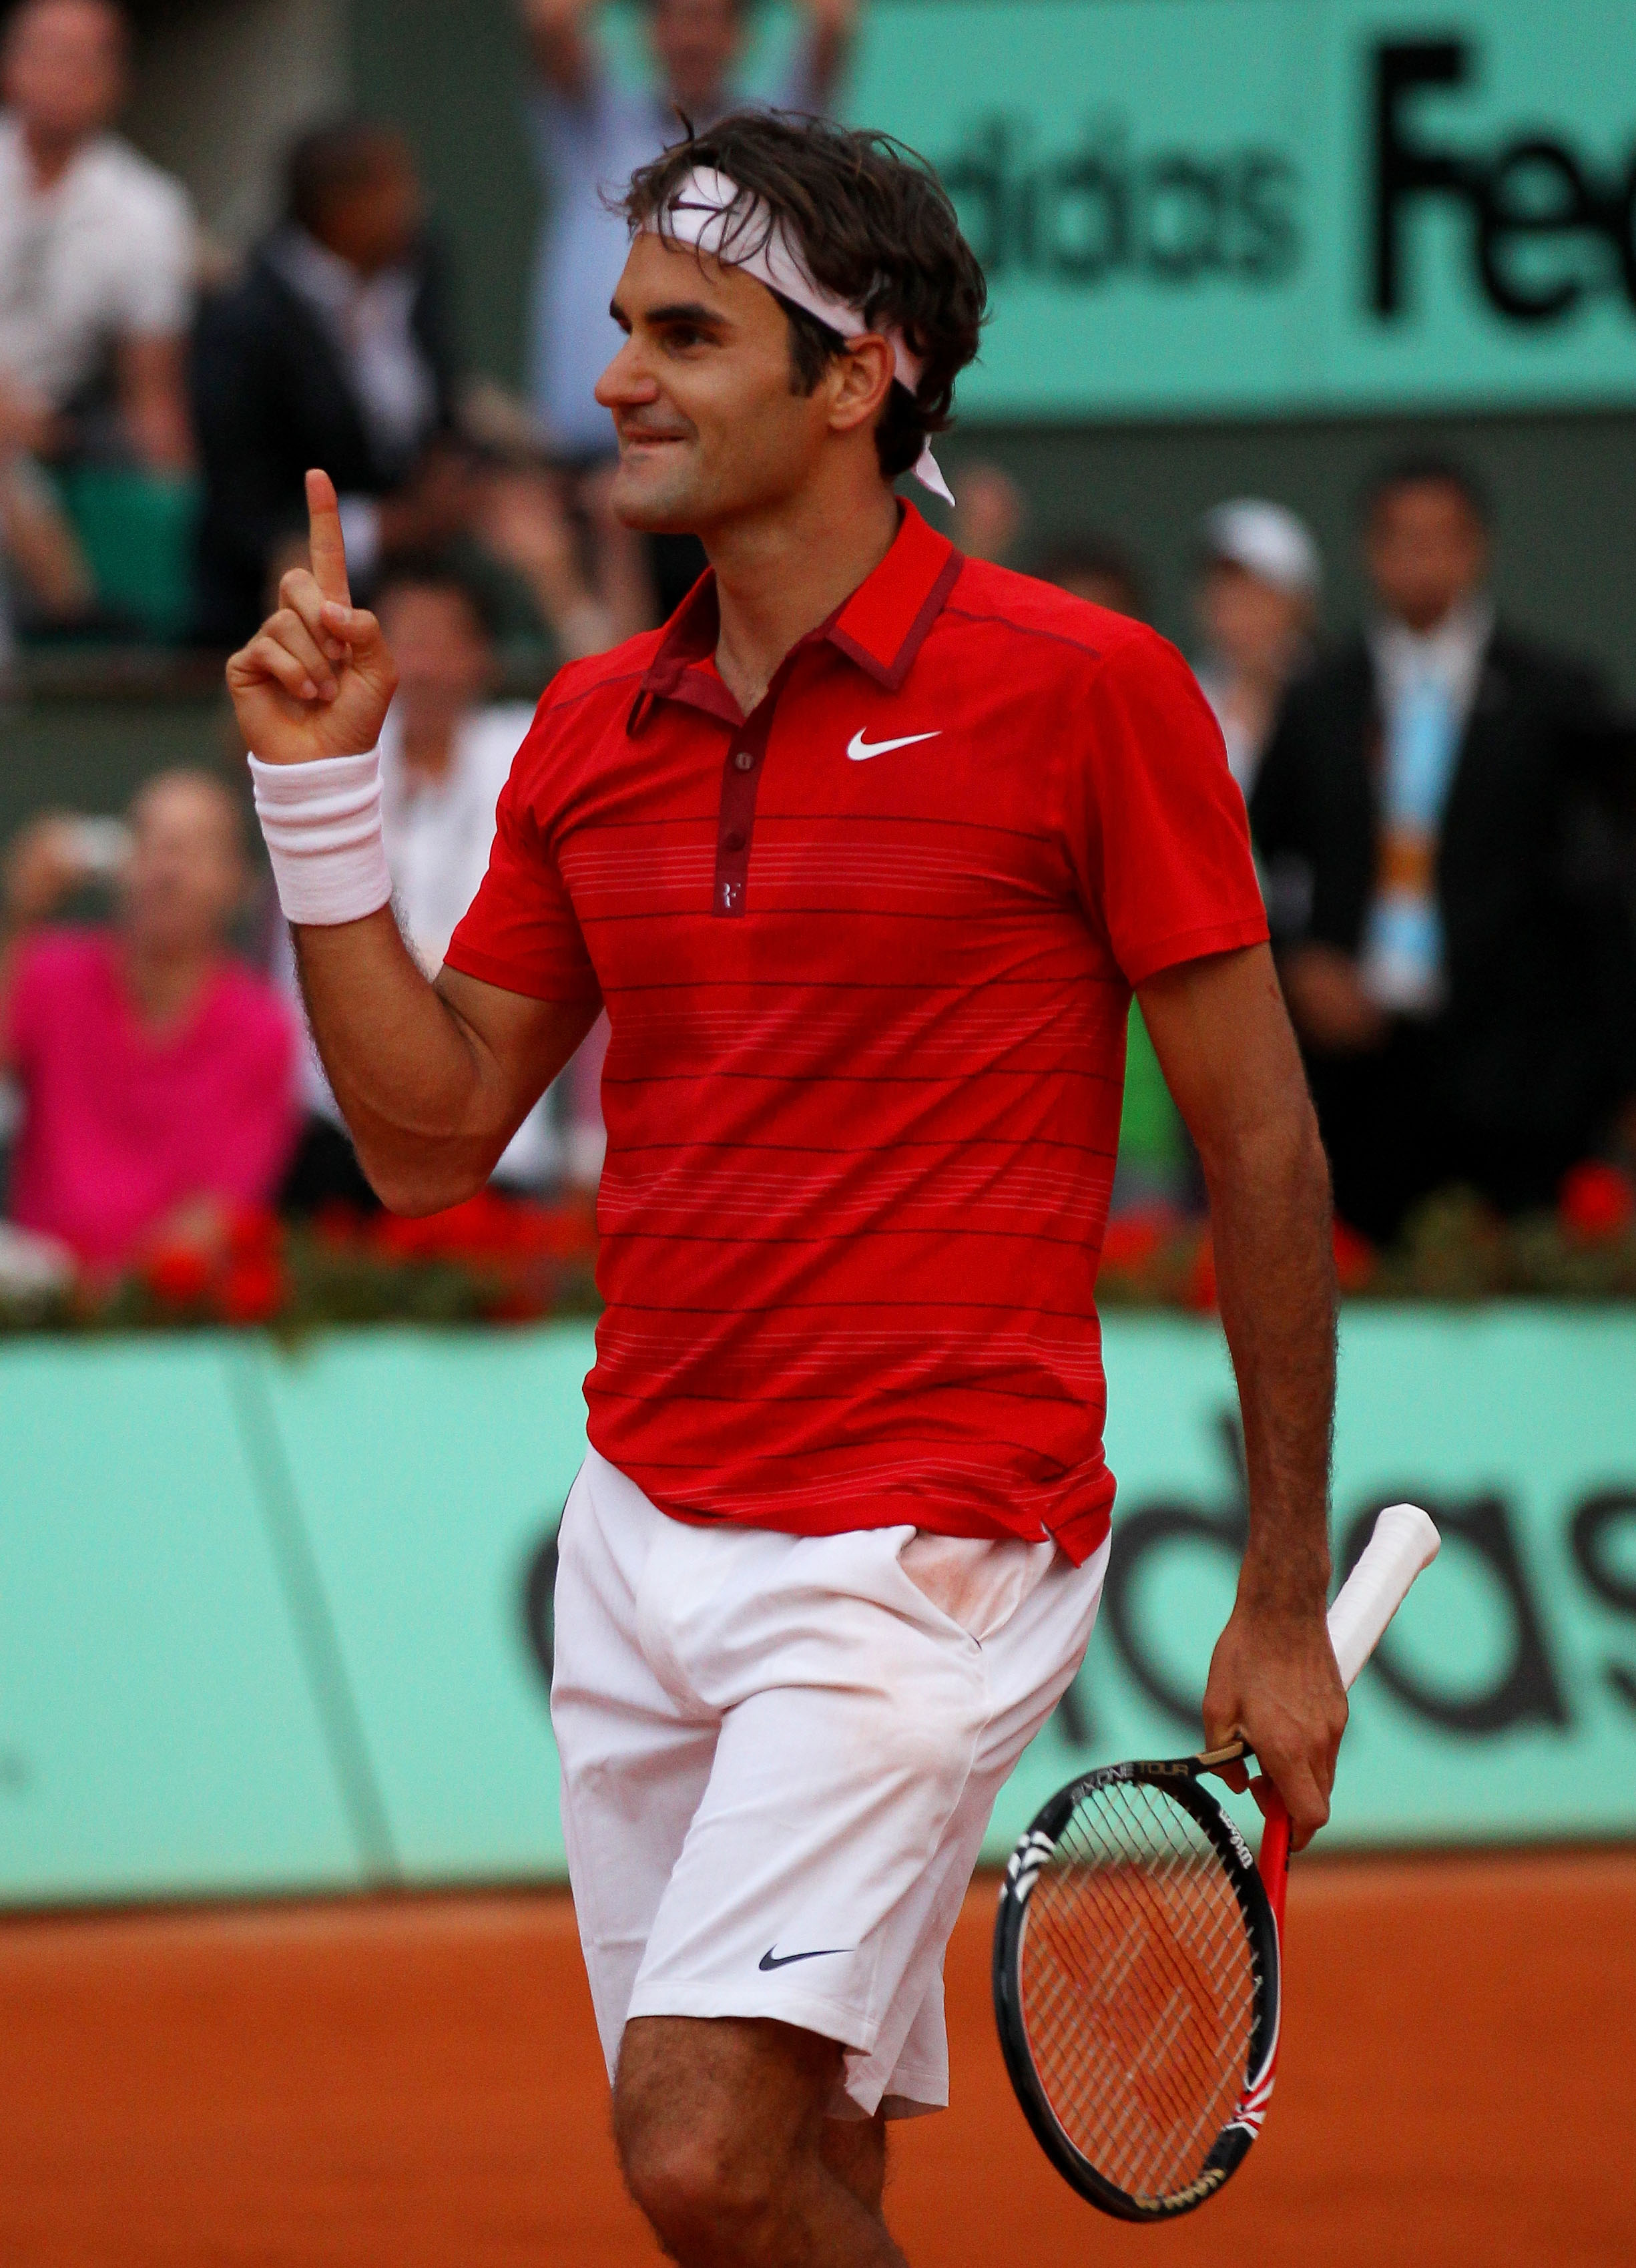 French Open 2011: Federer-Nadal Redux, the Rivalry That Never Dies